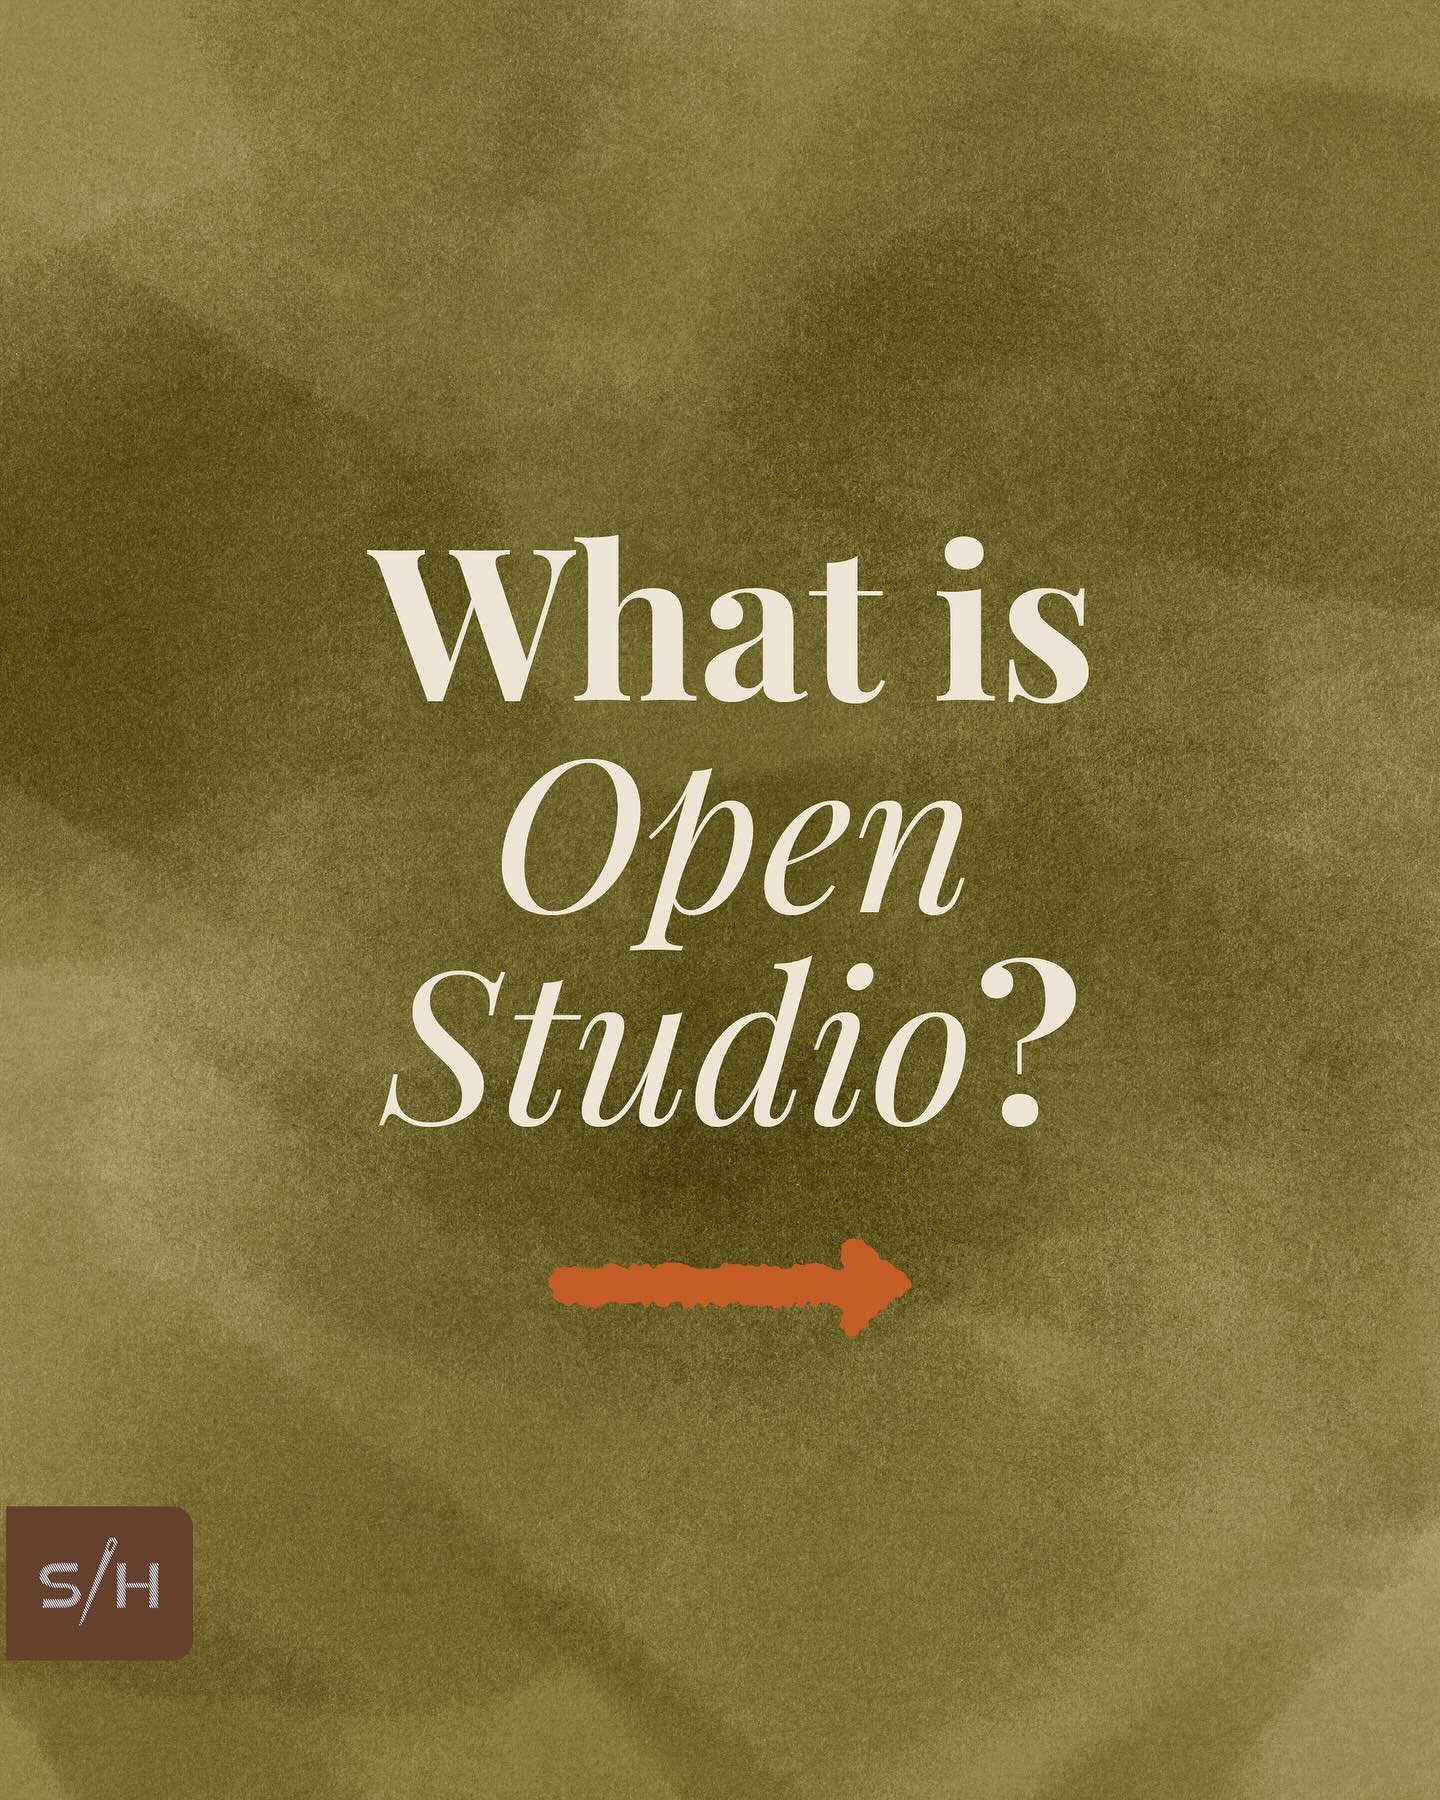 Open Studio is one of our studio sessions we are most excited about! It&rsquo;s a self guided studio session where you can connect with others and create on your own terms. 4 hours of studio time, only $65! 🙌🧷🧵✂️

Visit our website stitchhousestud